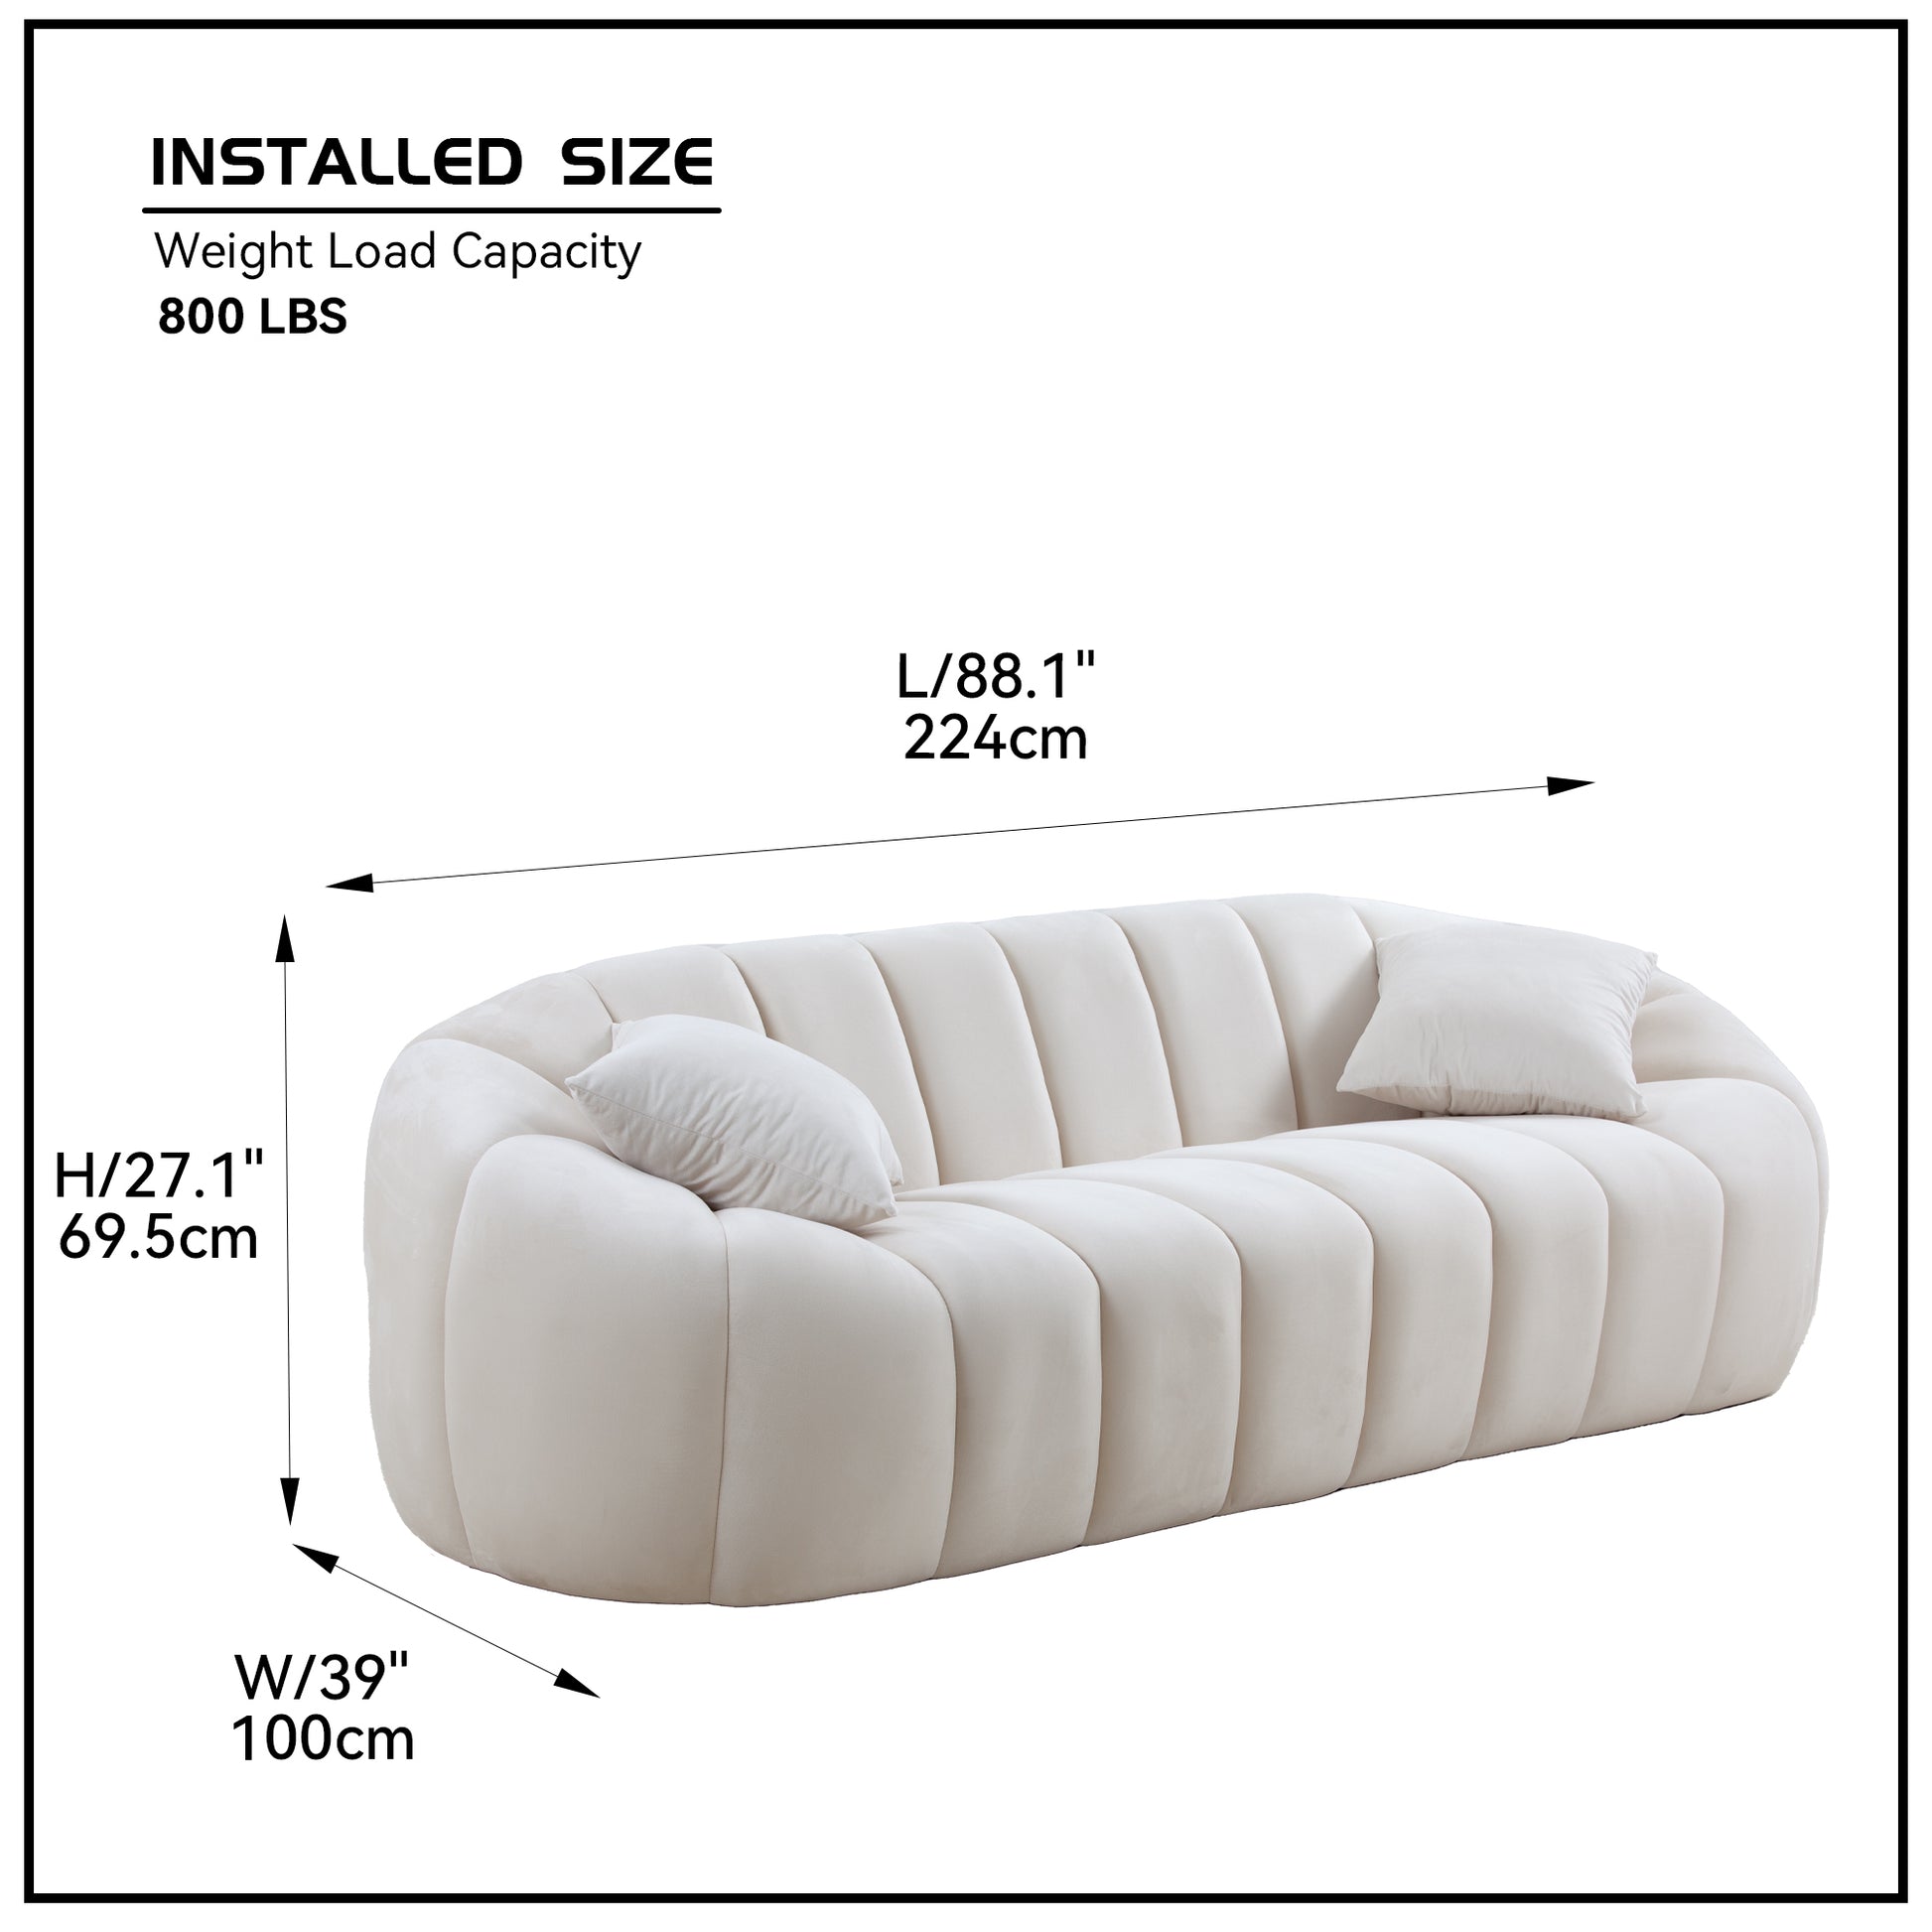 3 Seater Modern Sofa with Deep Channel Tufted - Beige Performance Velvet